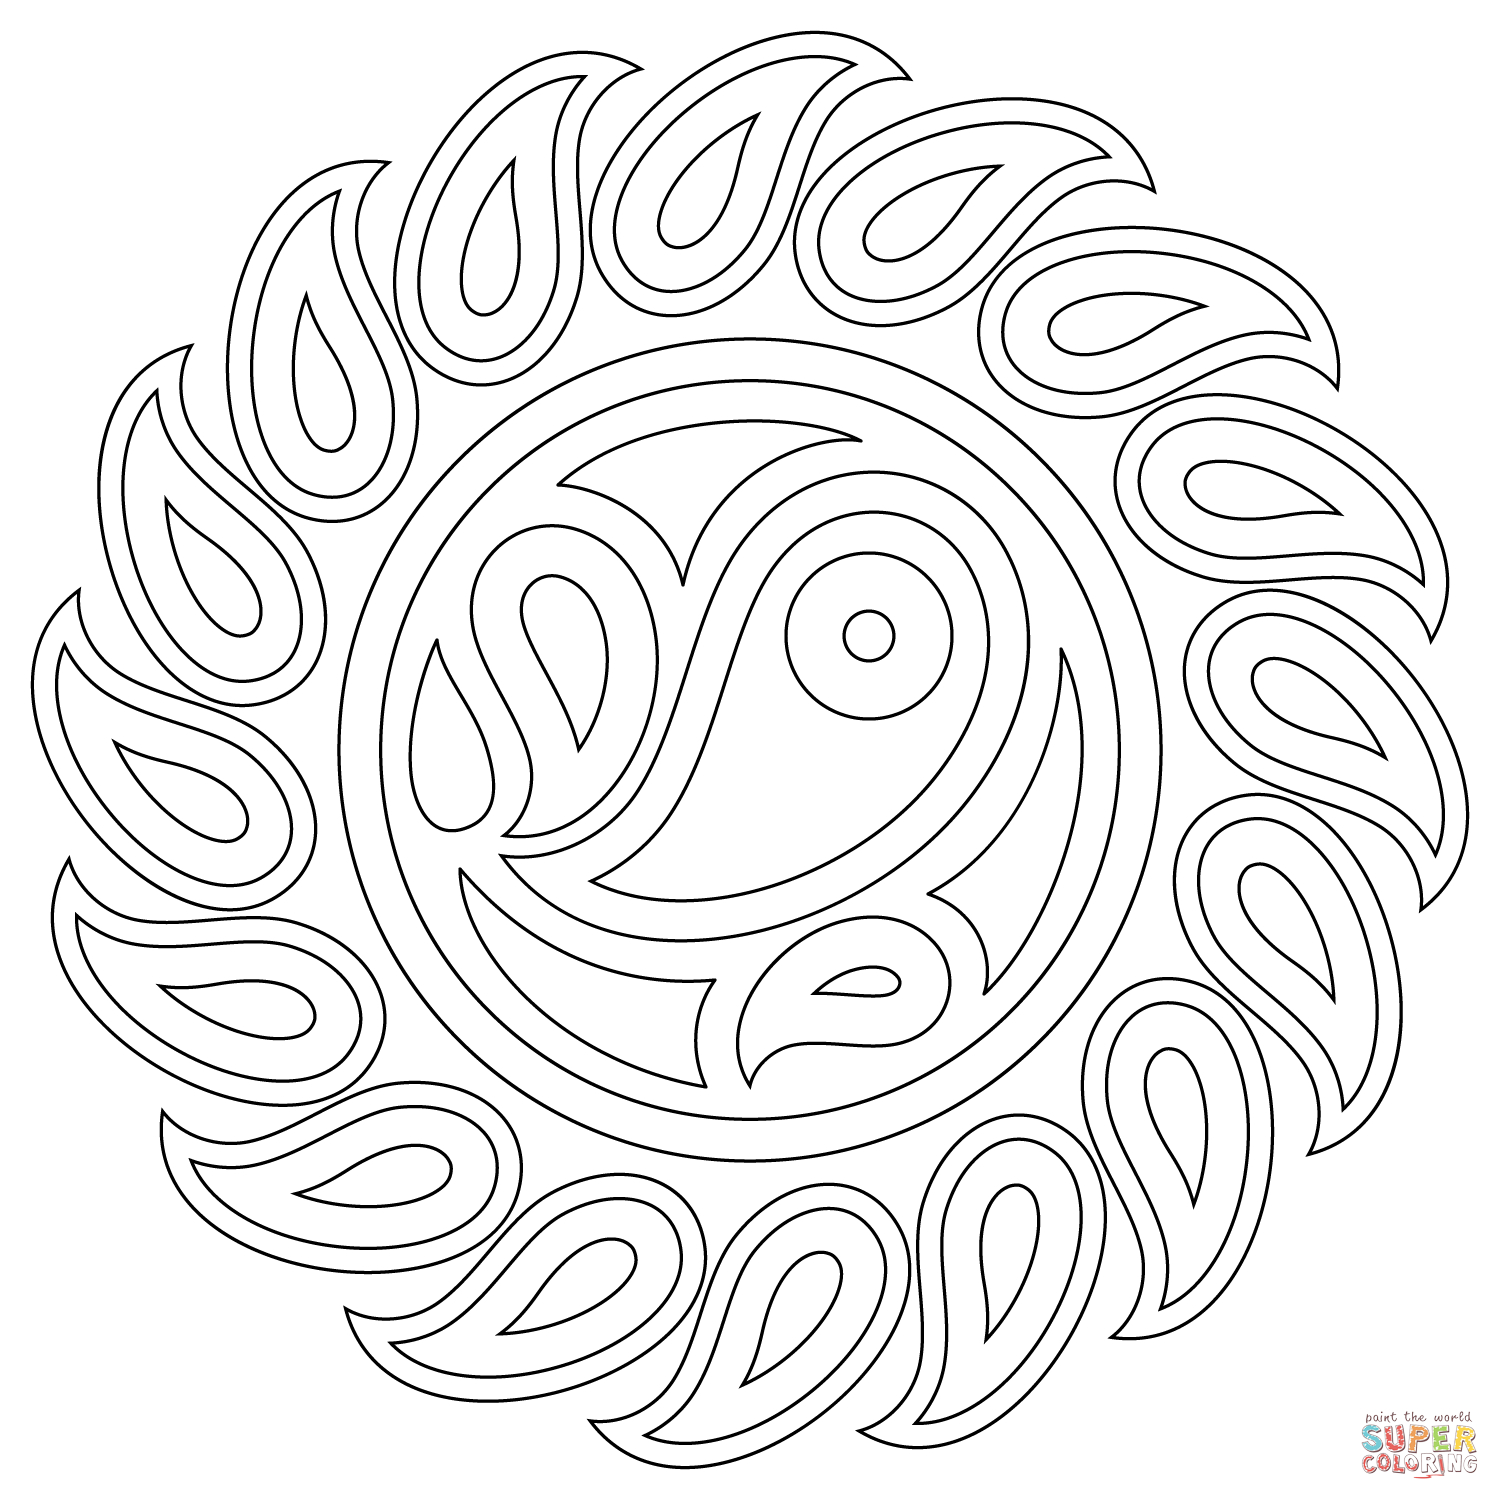 Mandala Coloring Pages Free Online Paisley Mandala Coloring Page Free Printable Coloring Pages